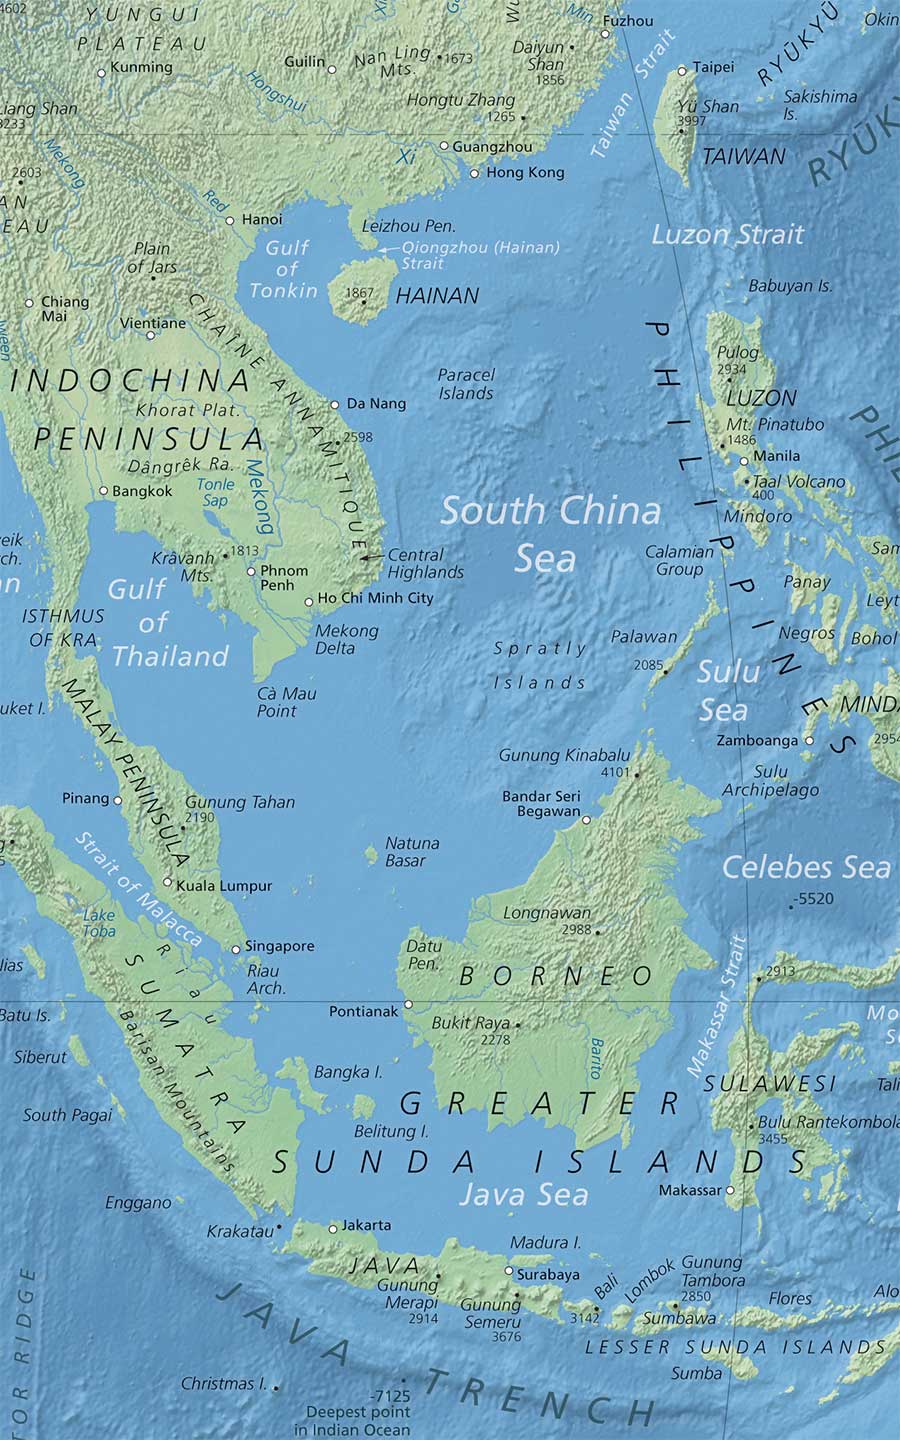 South China Sea On World Map Political Map of the South China Sea   Nations Online Project